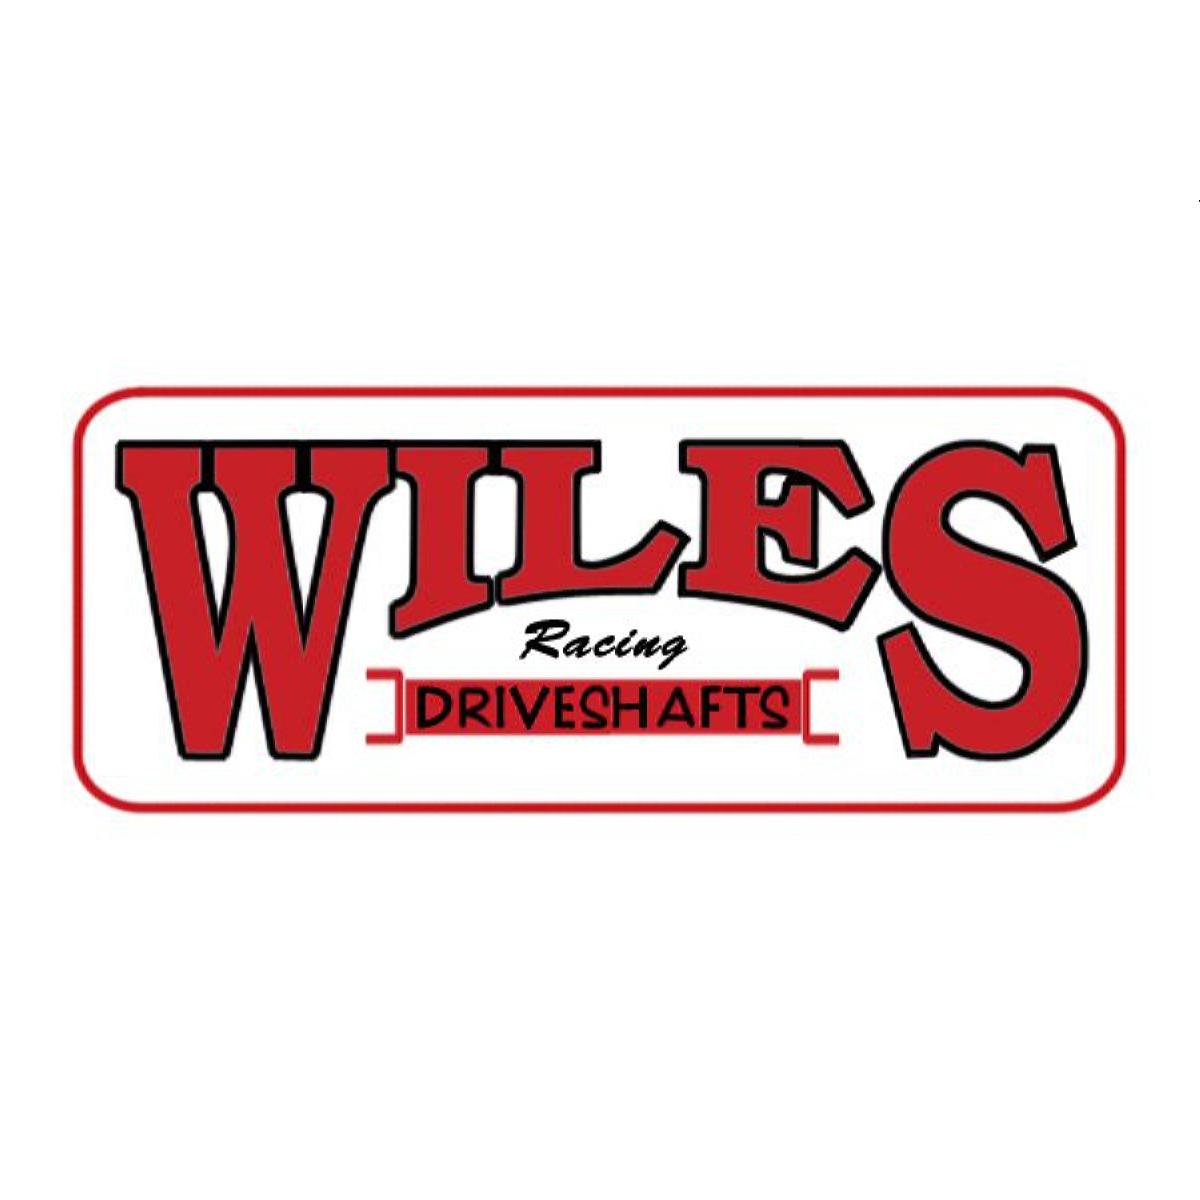 Wiles Driveshafts